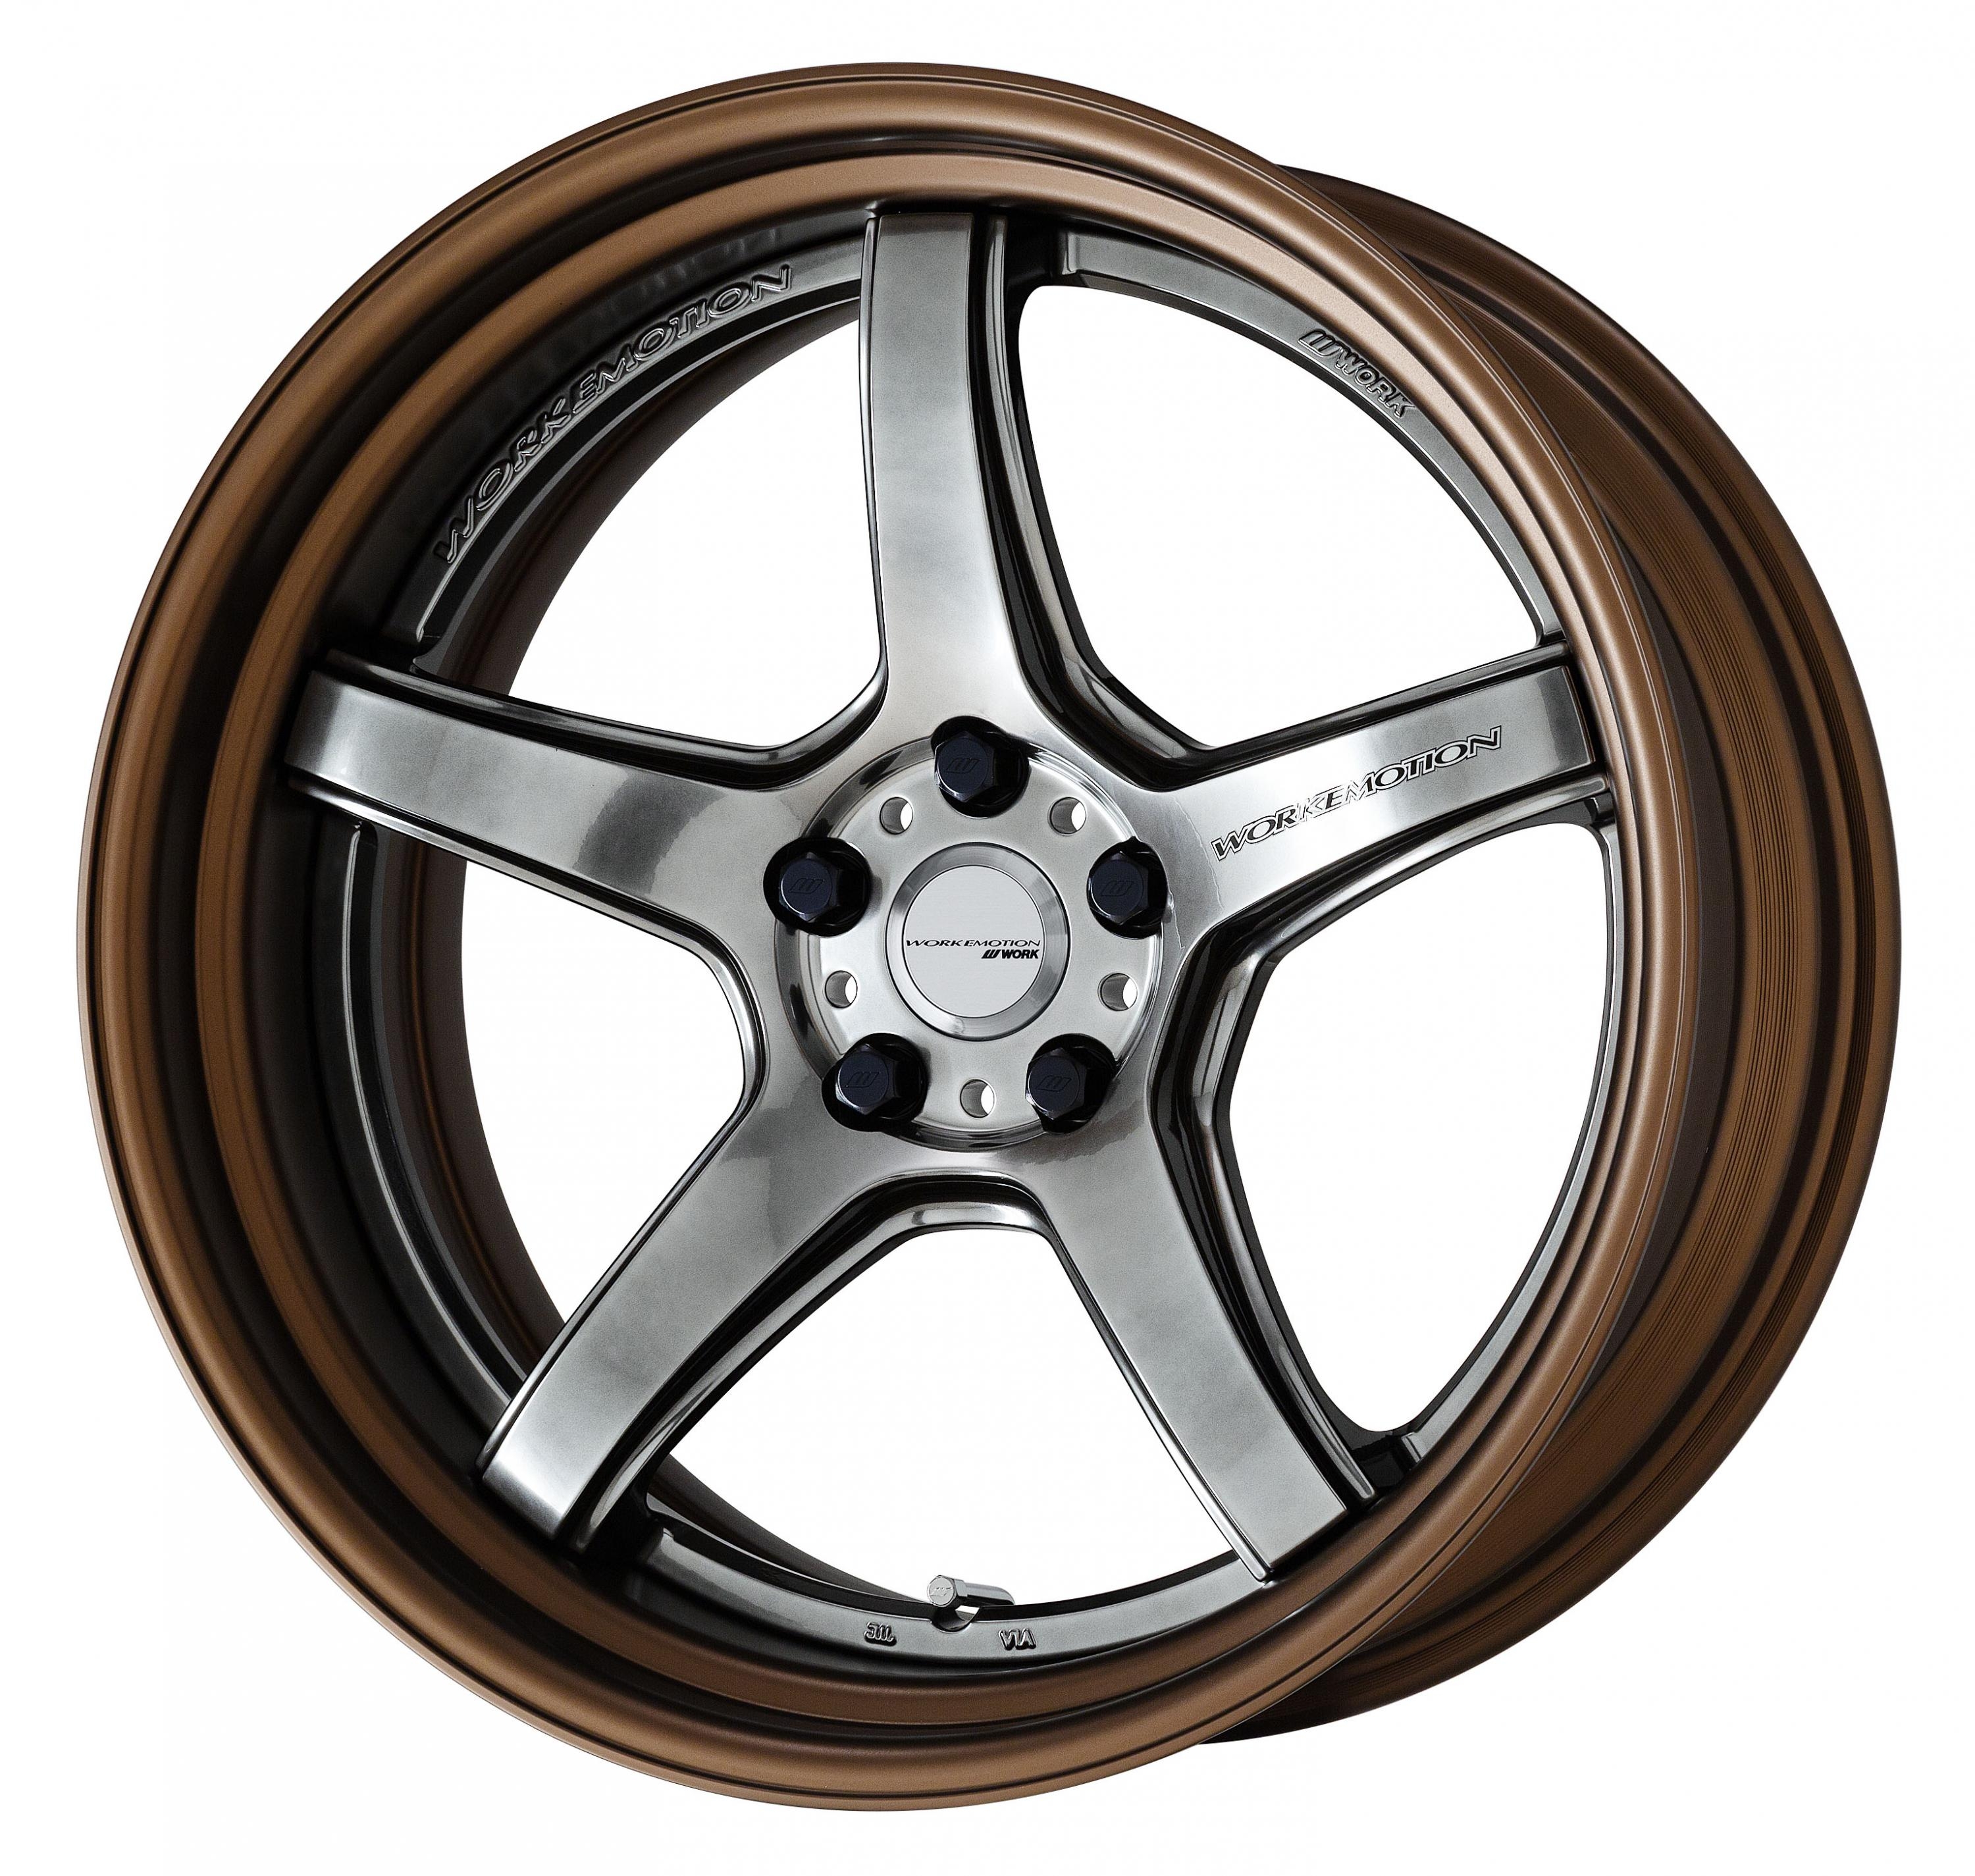 SALE／91%OFF】 WORK EMOTION T5R 2P WHEEL DEEP CONCAVE OFF CANDY GOLD  LW-0706CG JAN：4580626312627